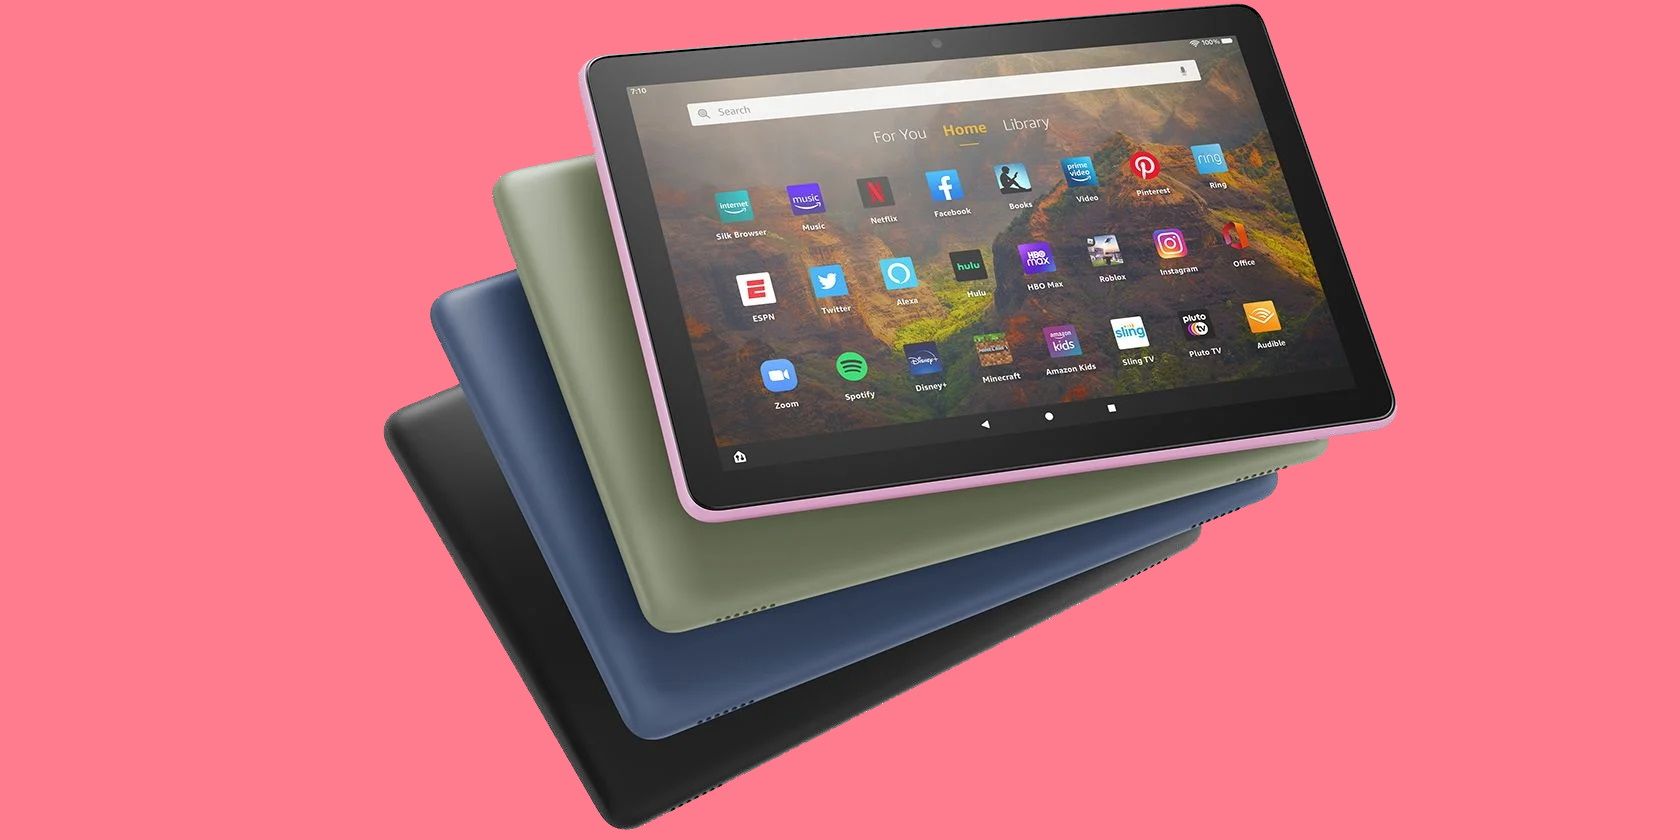 How to install Google Play Store on any  Fire HD without ROOT